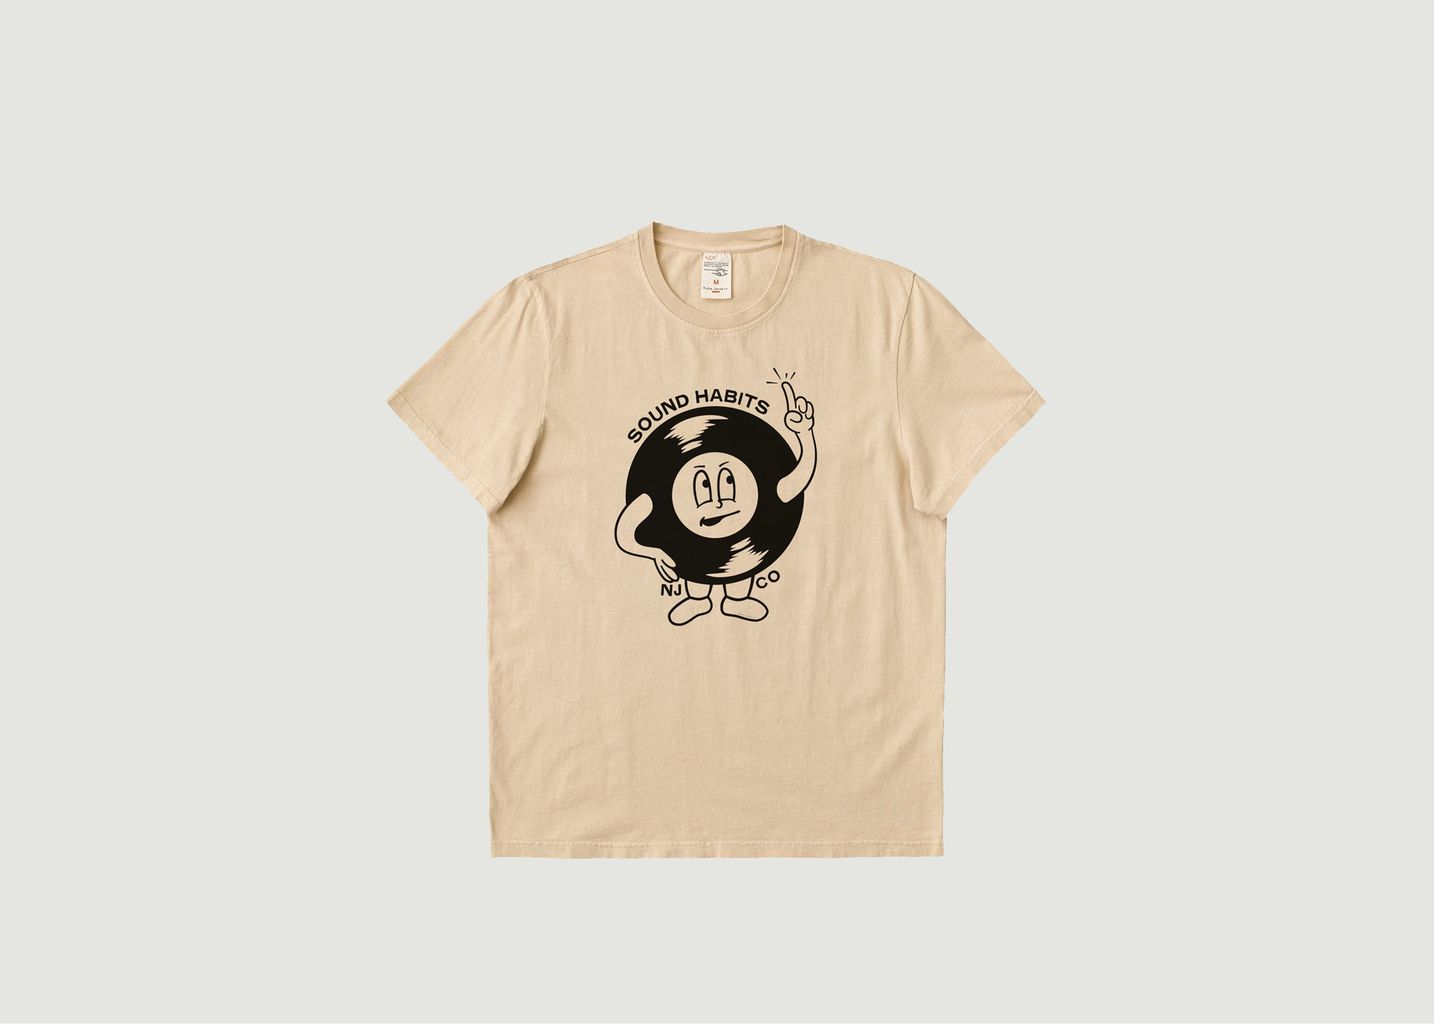 Nudie Jeans Roy Sound Habits T-shirt